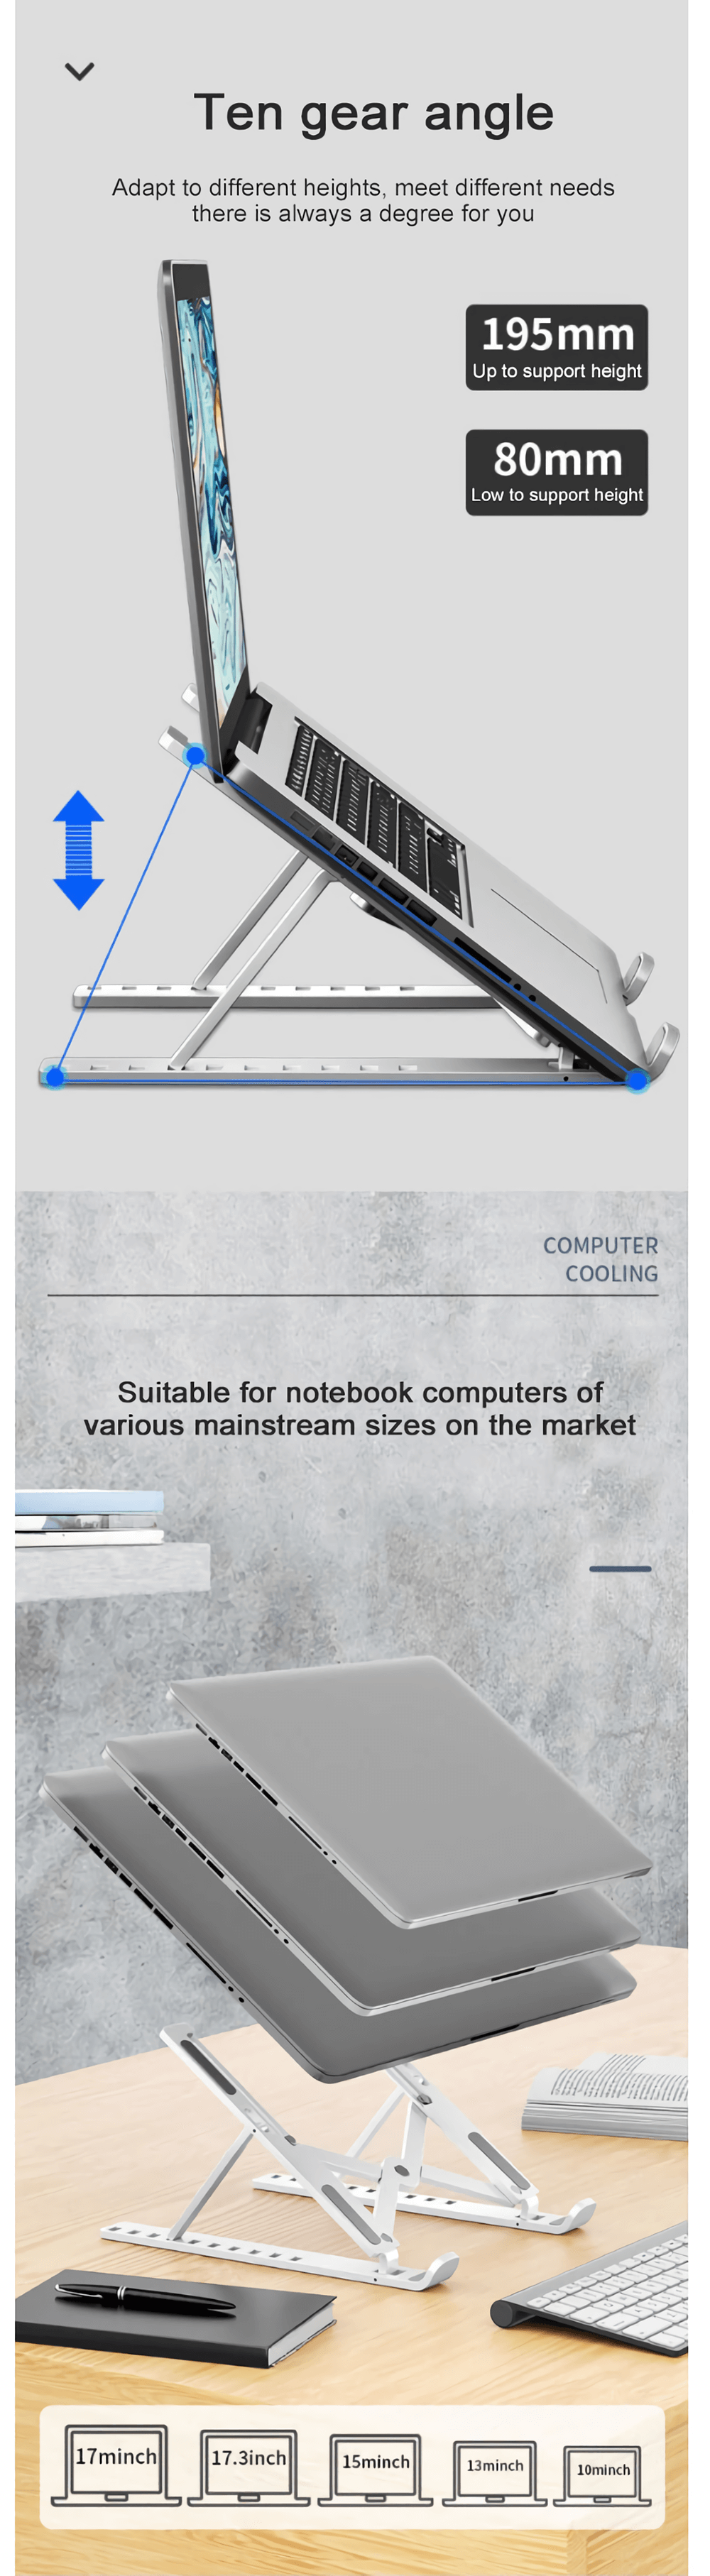 Foldable-Laptop-Stand-Holder-Notebook-Bracket-ABS-Cooling-Pad-10-Angle-Adjustable-Portable-Support-B-1767109-4